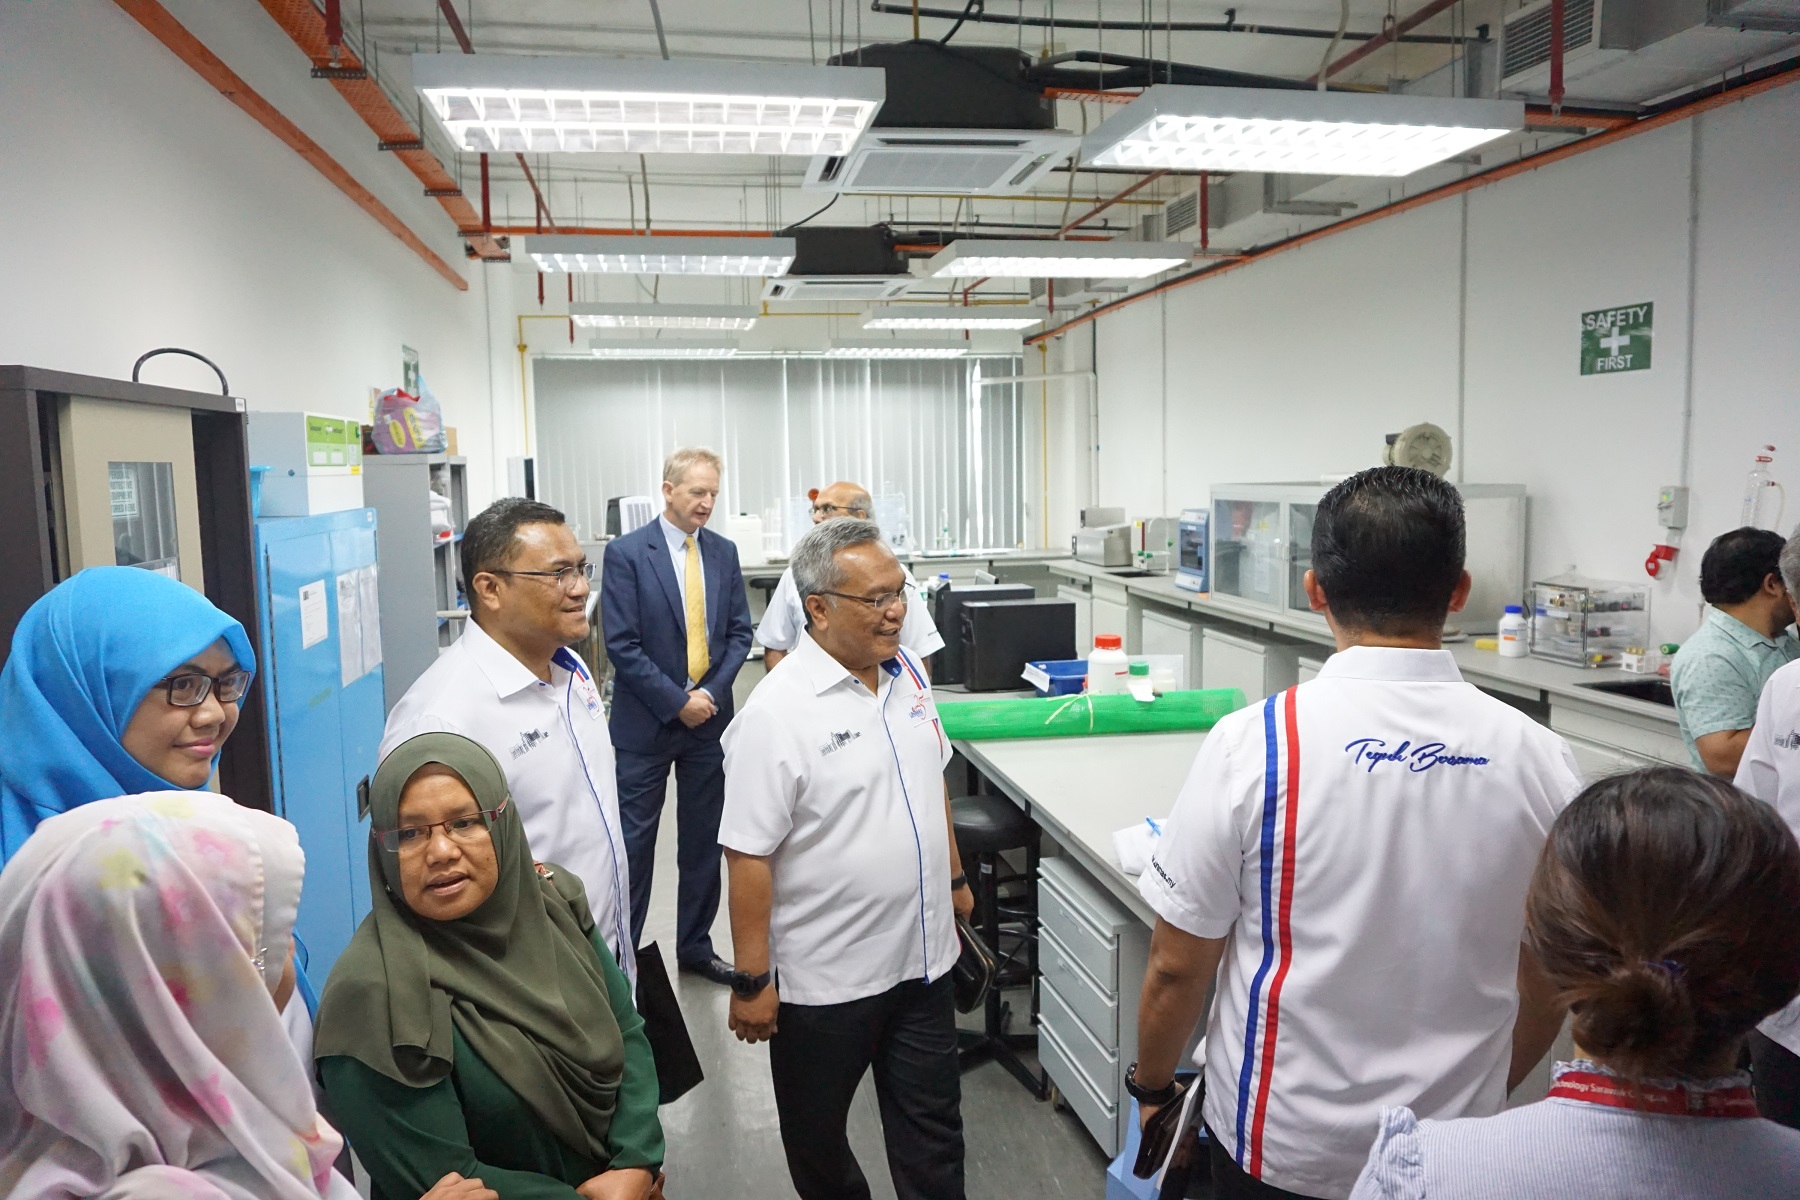 The delegation touring the engineering laboratory.